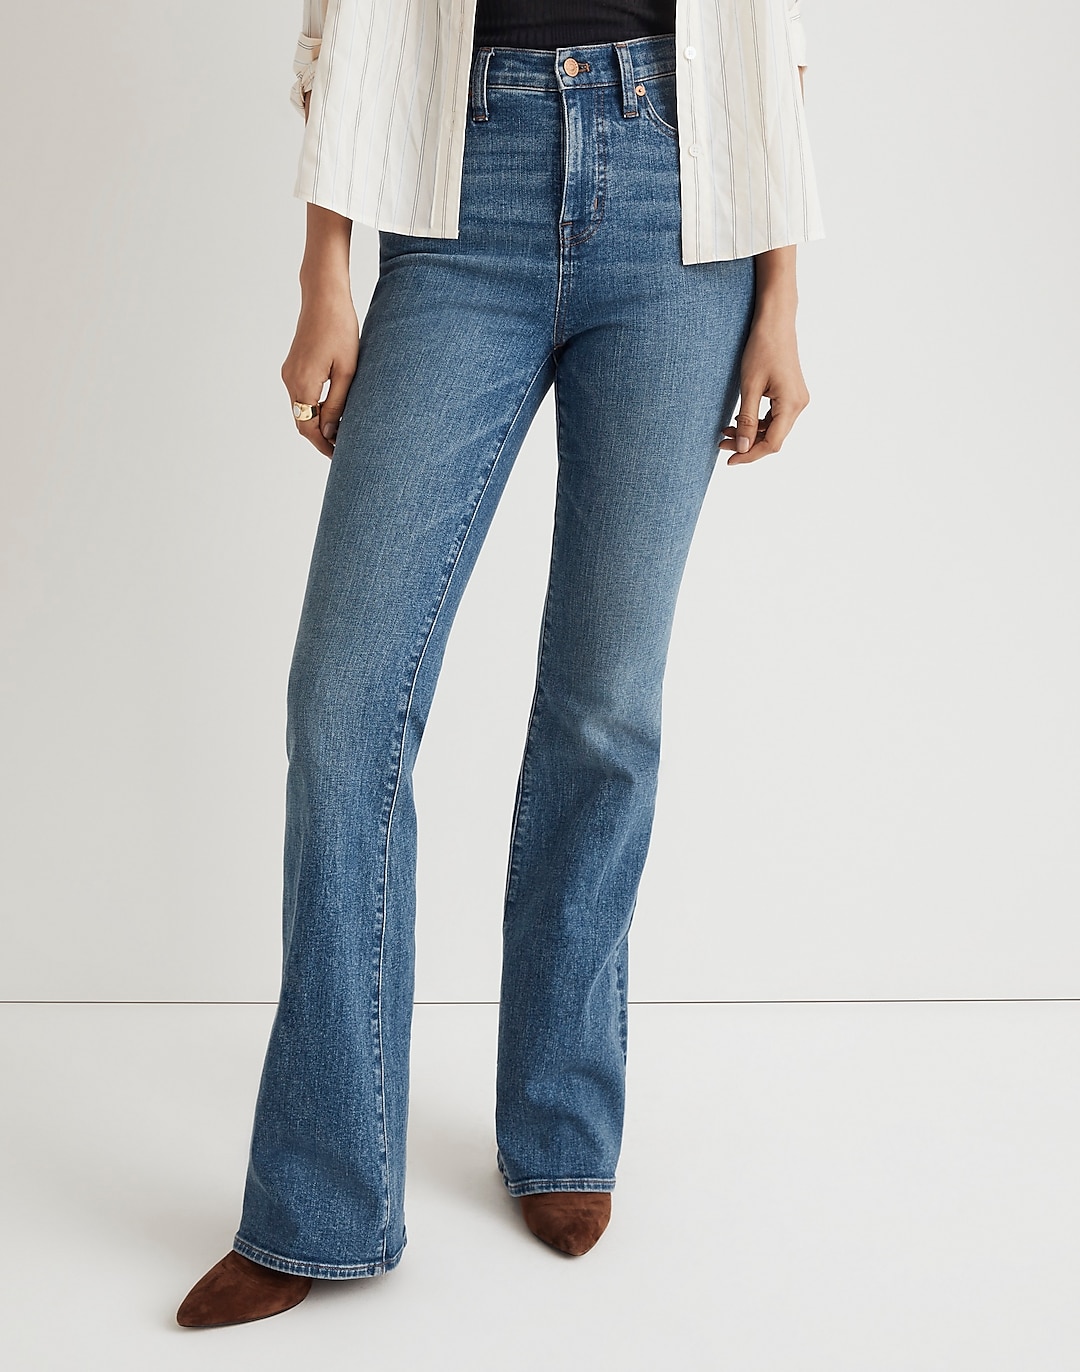 Skinny Flare Jeans in Calvino Wash: Crease Edition | Madewell